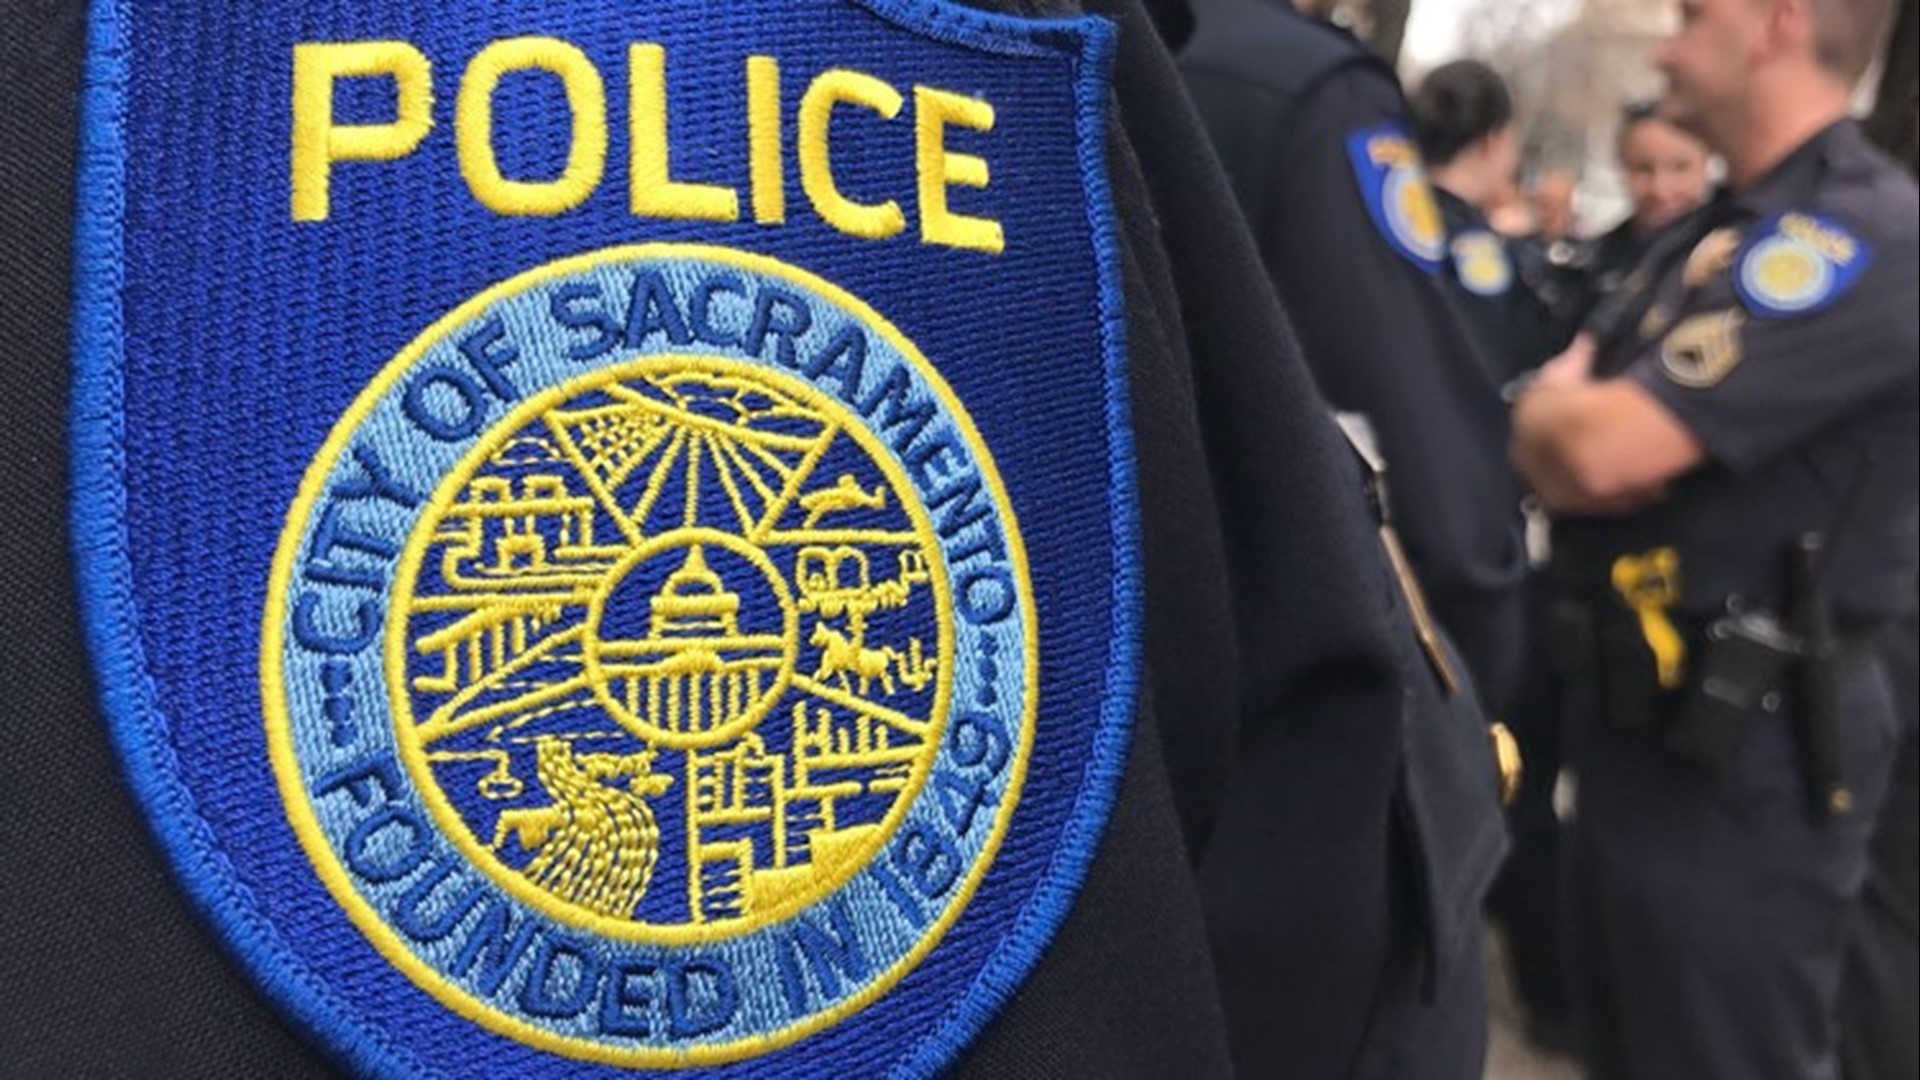 Several officers from Northern California will be honored virtually from our nation's capitol in place of an annual memorial during police week